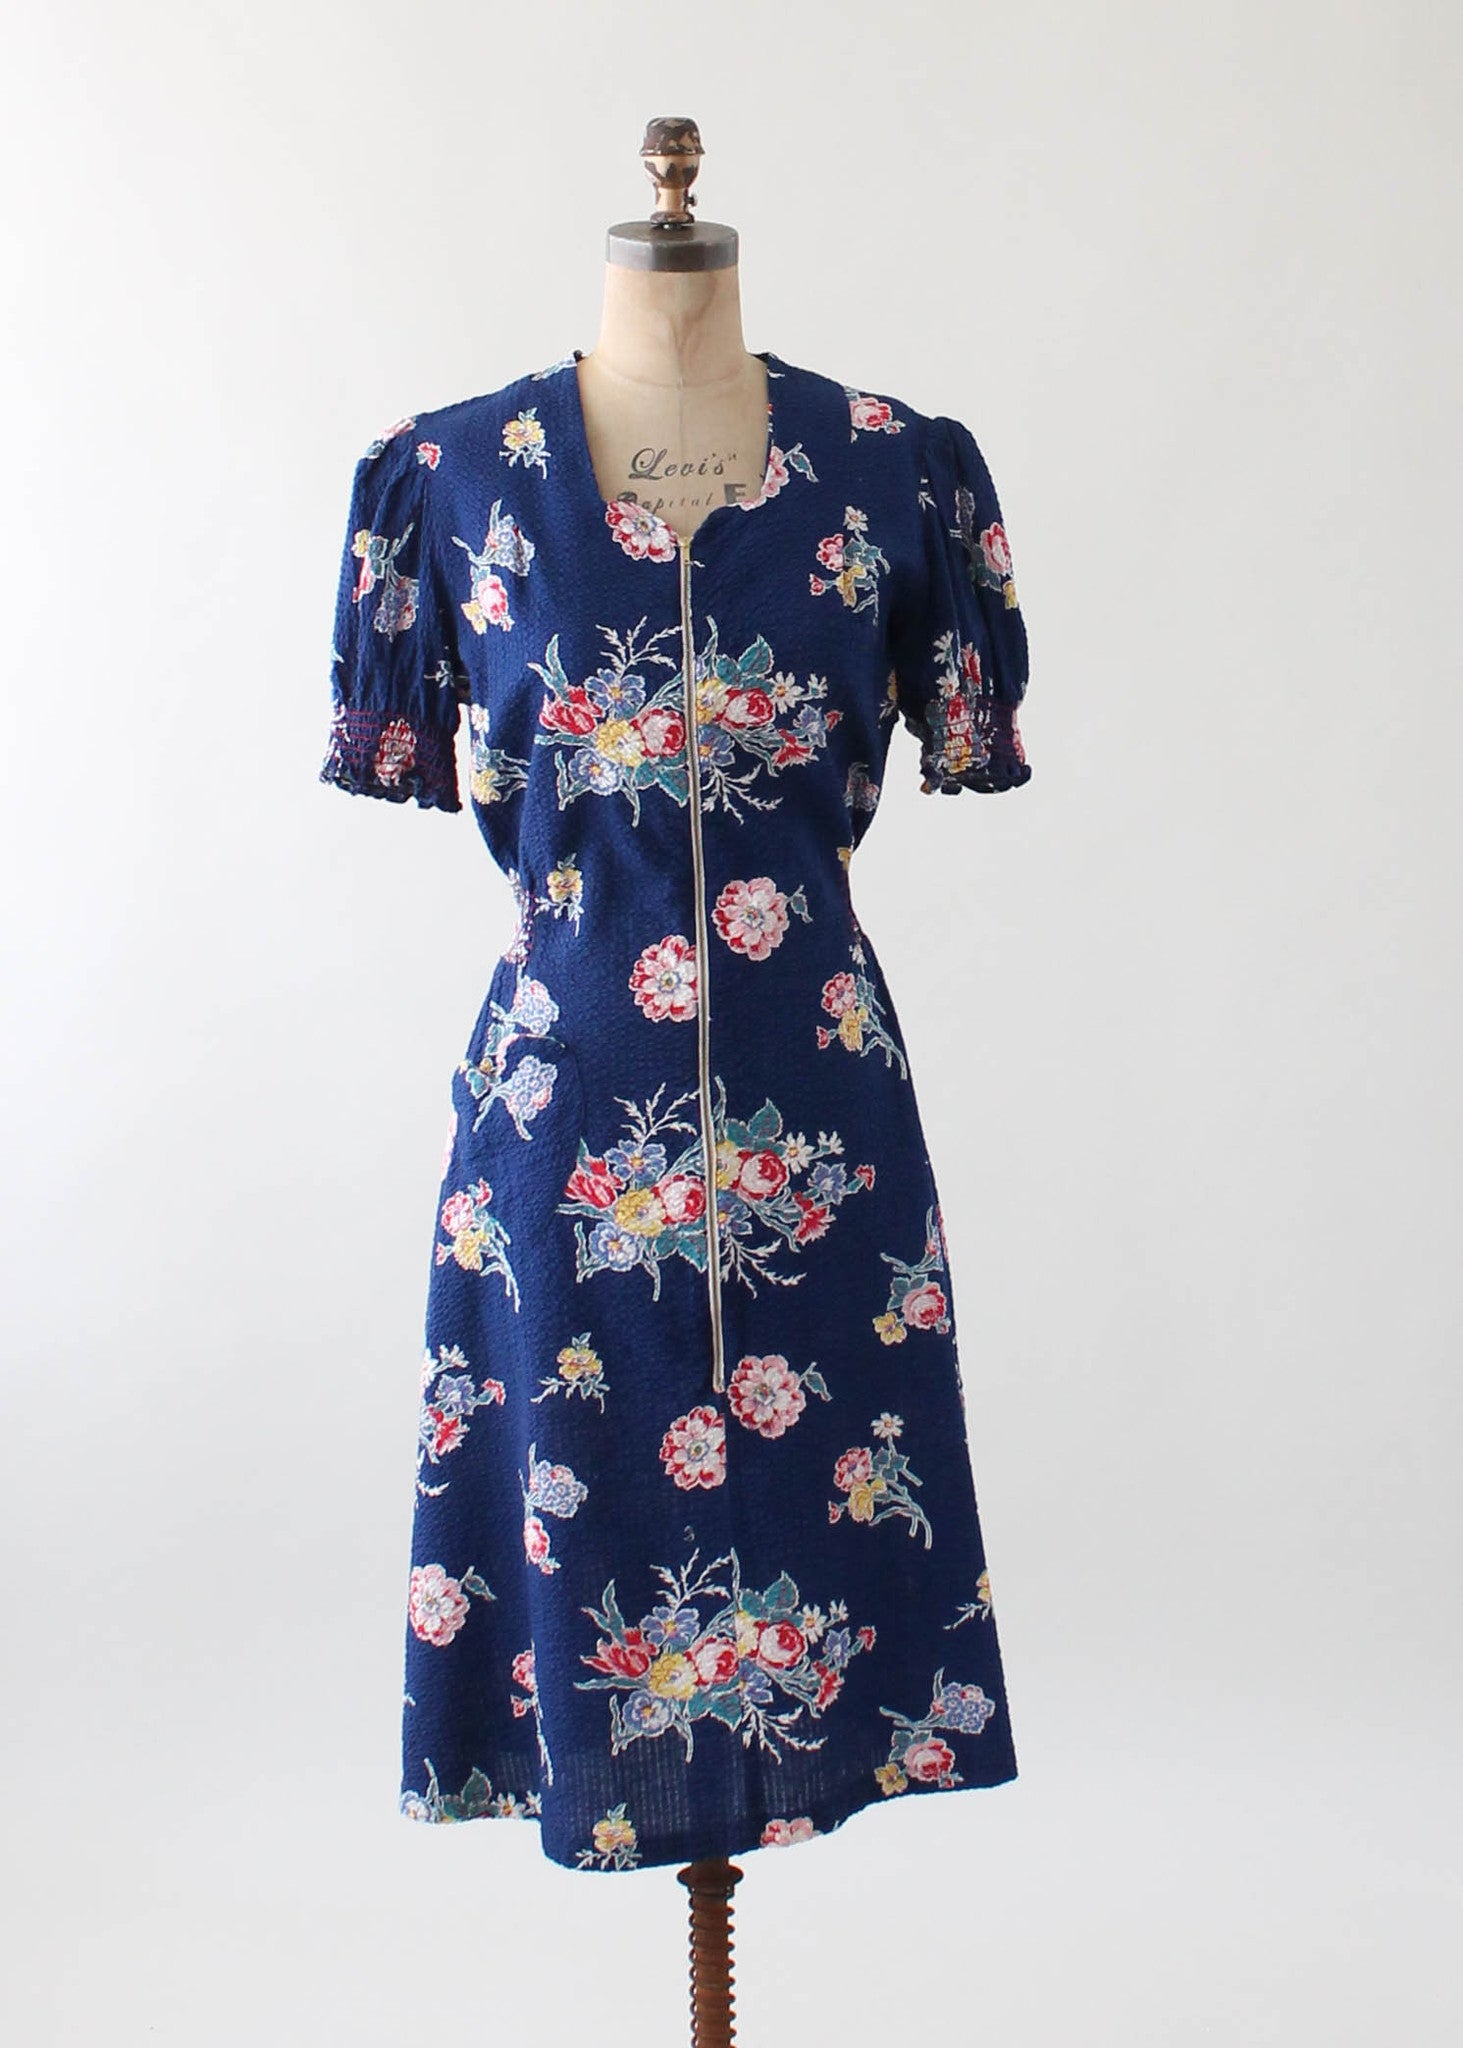 Vintage 1940s Floral Cotton Zip Front Day Dress - Raleigh Vintage